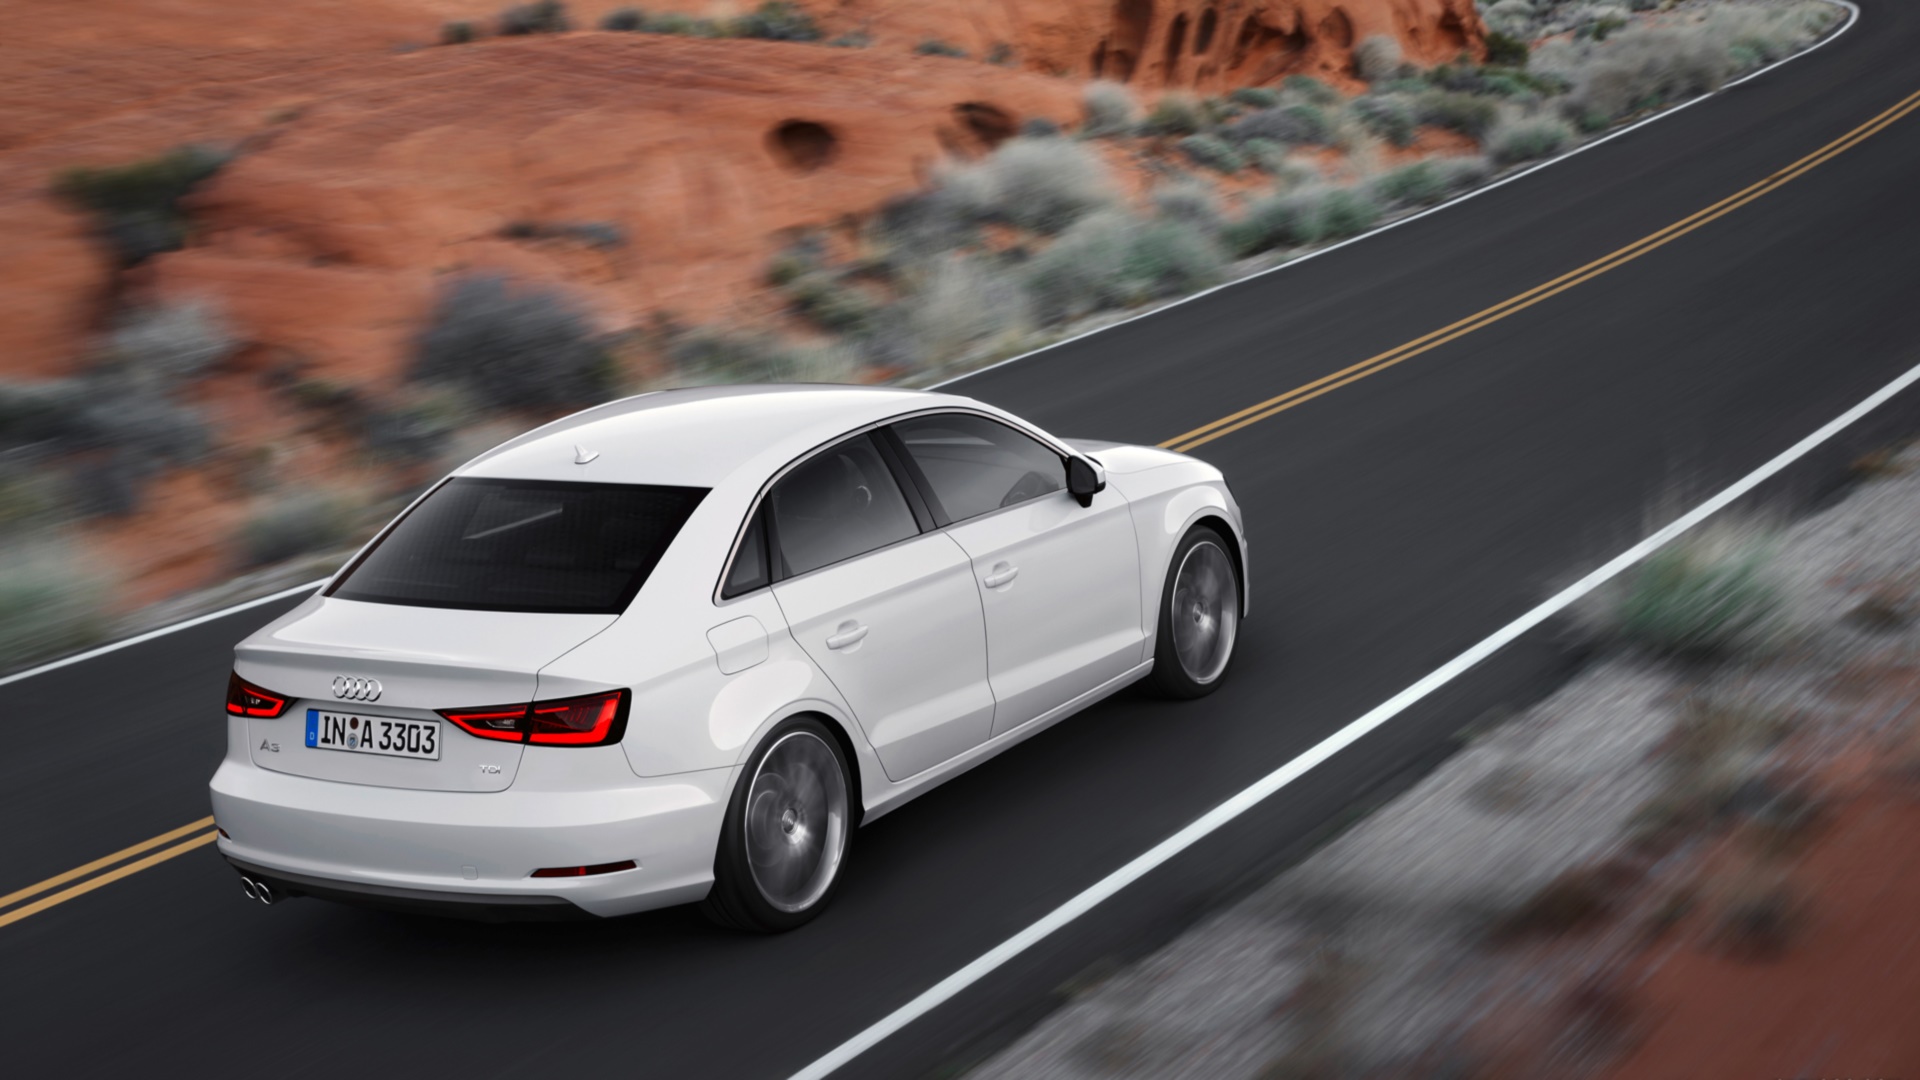 Vehicles Audi A3 HD Wallpaper | Background Image